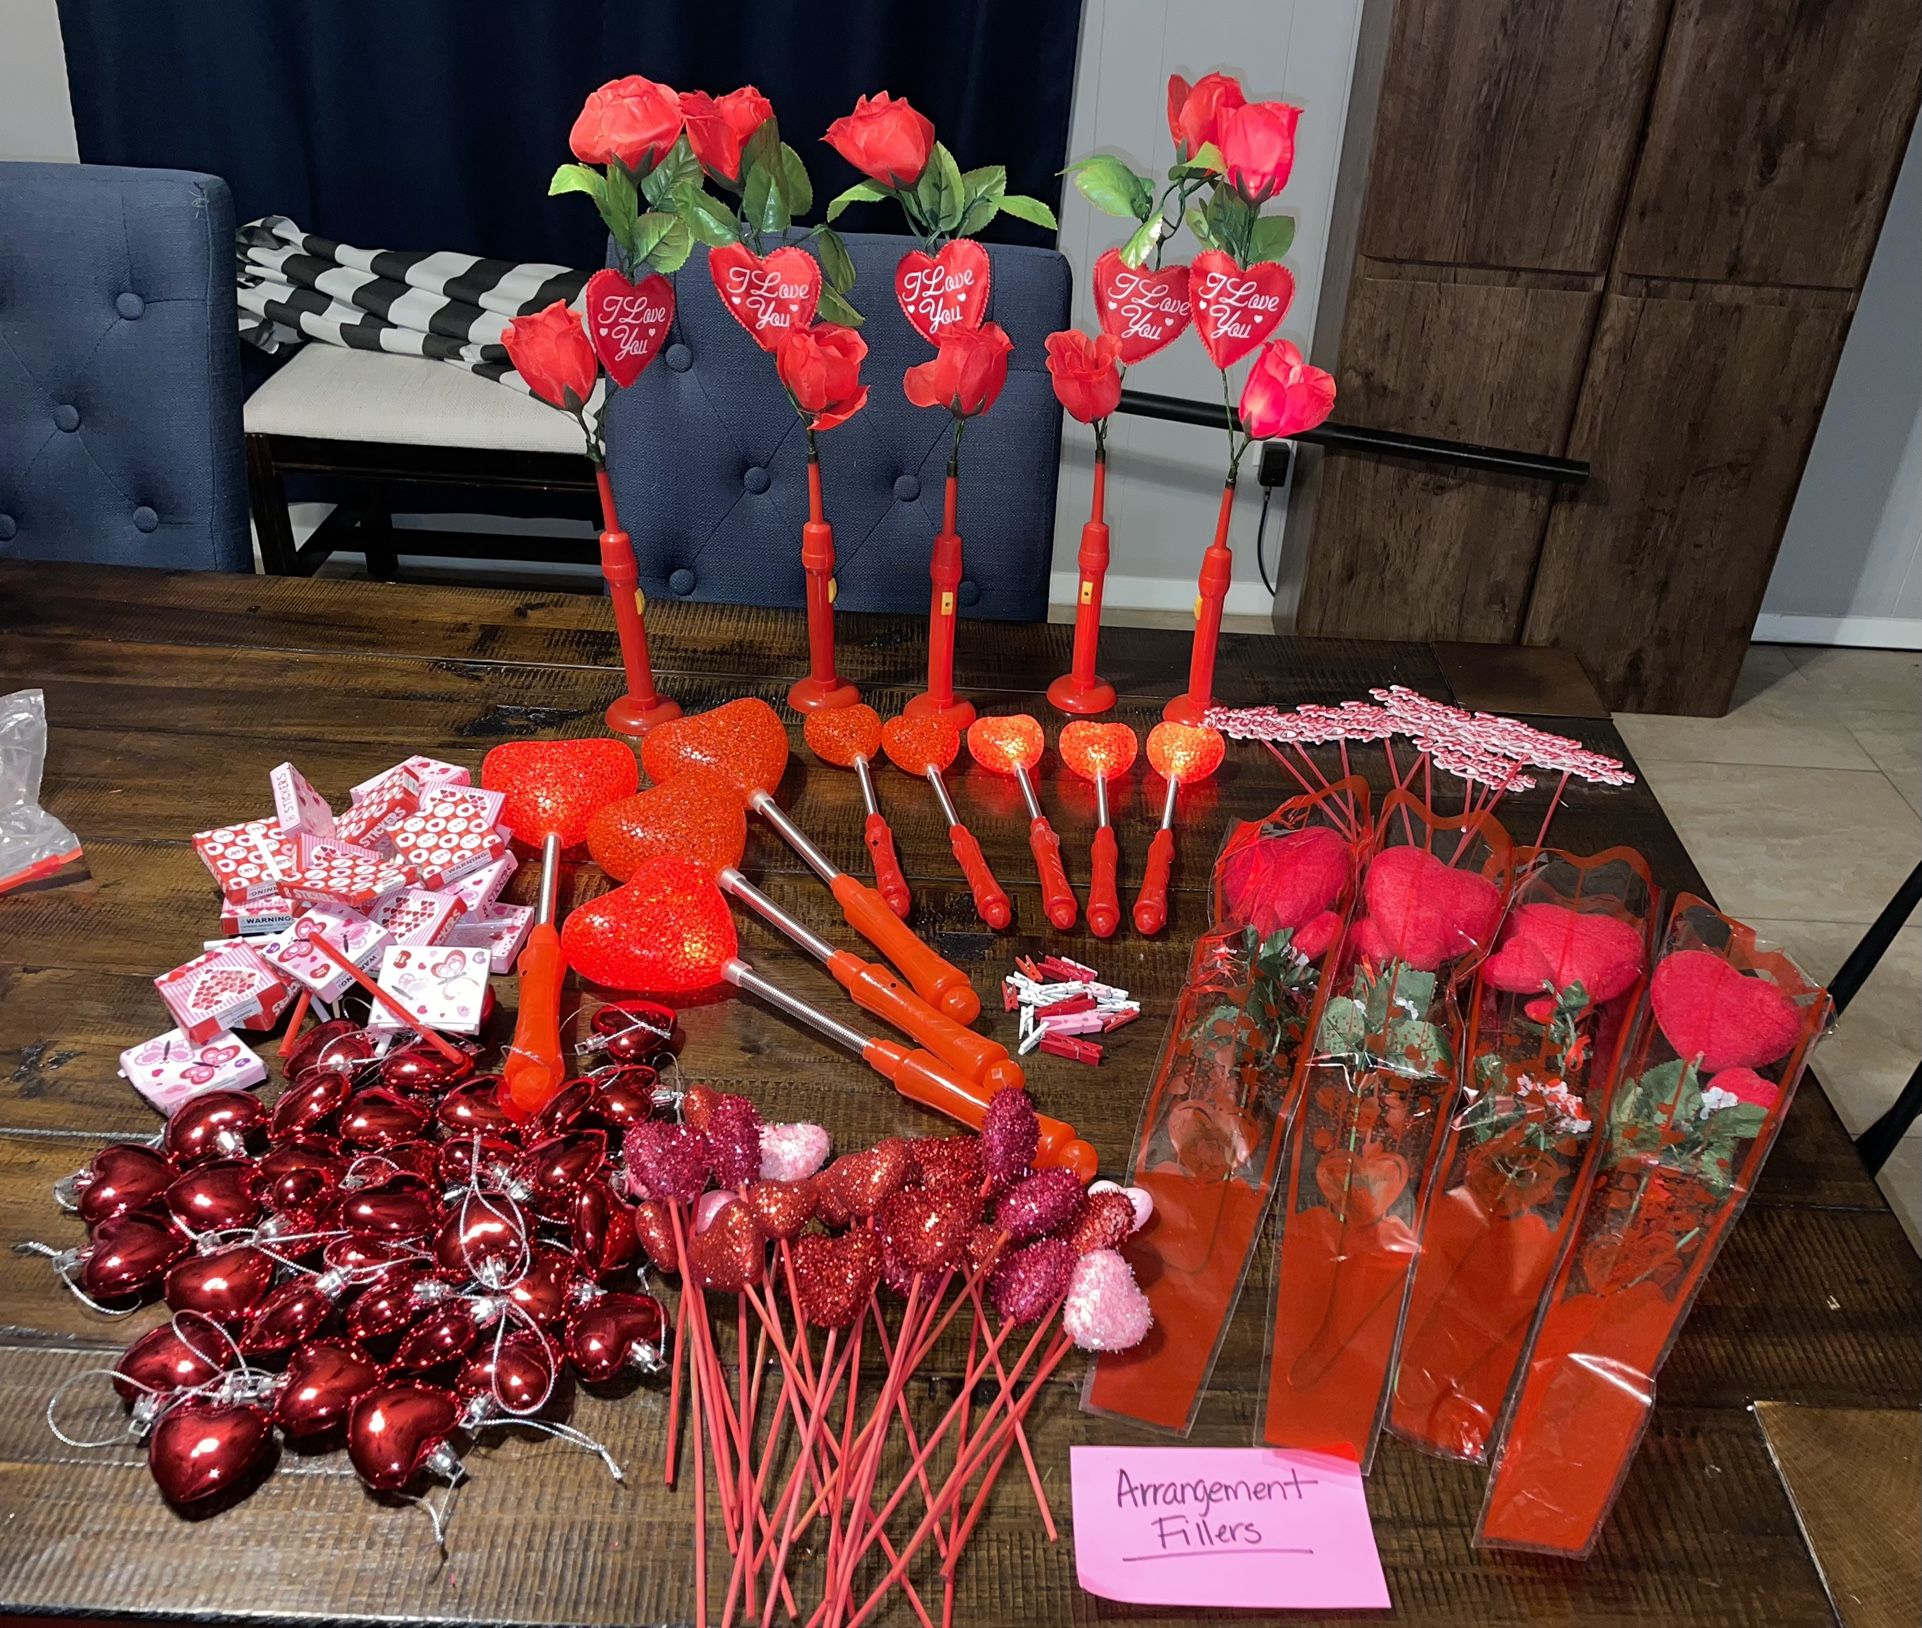 Calling All Makers!!! Valentine’s Supplies For Arrangement Making!